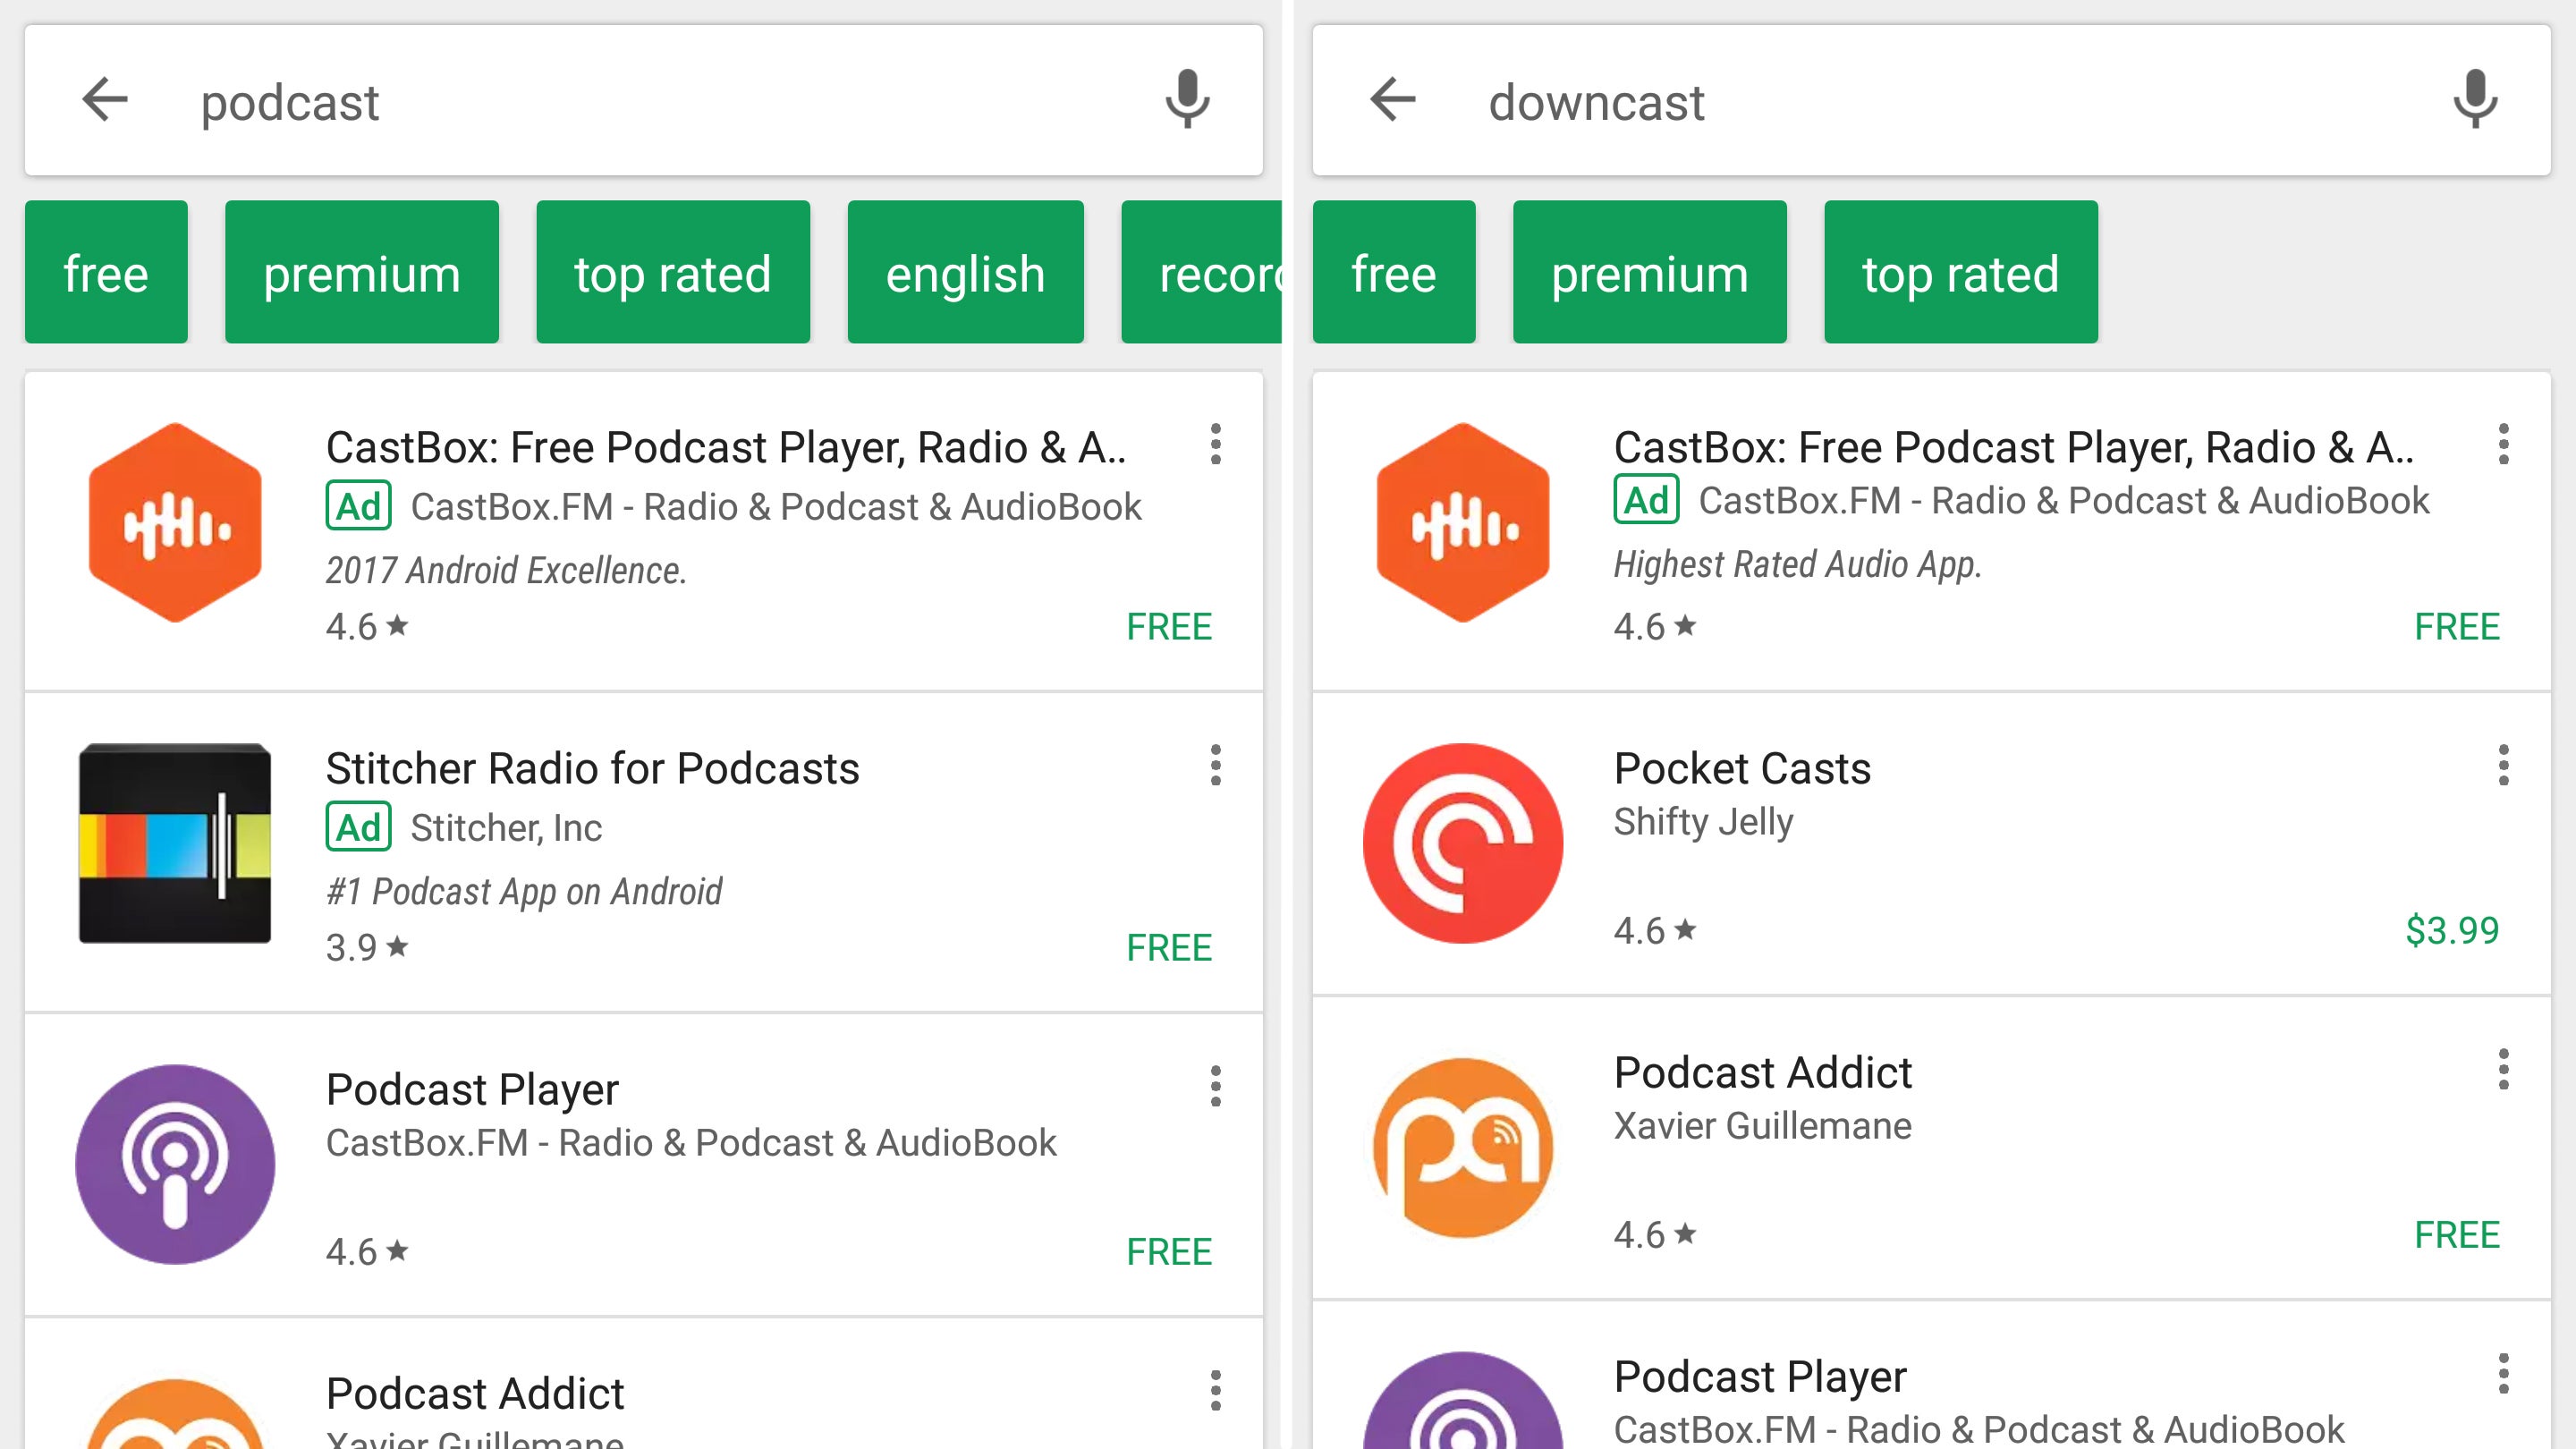 Previous version of search results - Google Play adding app size and download count in search results